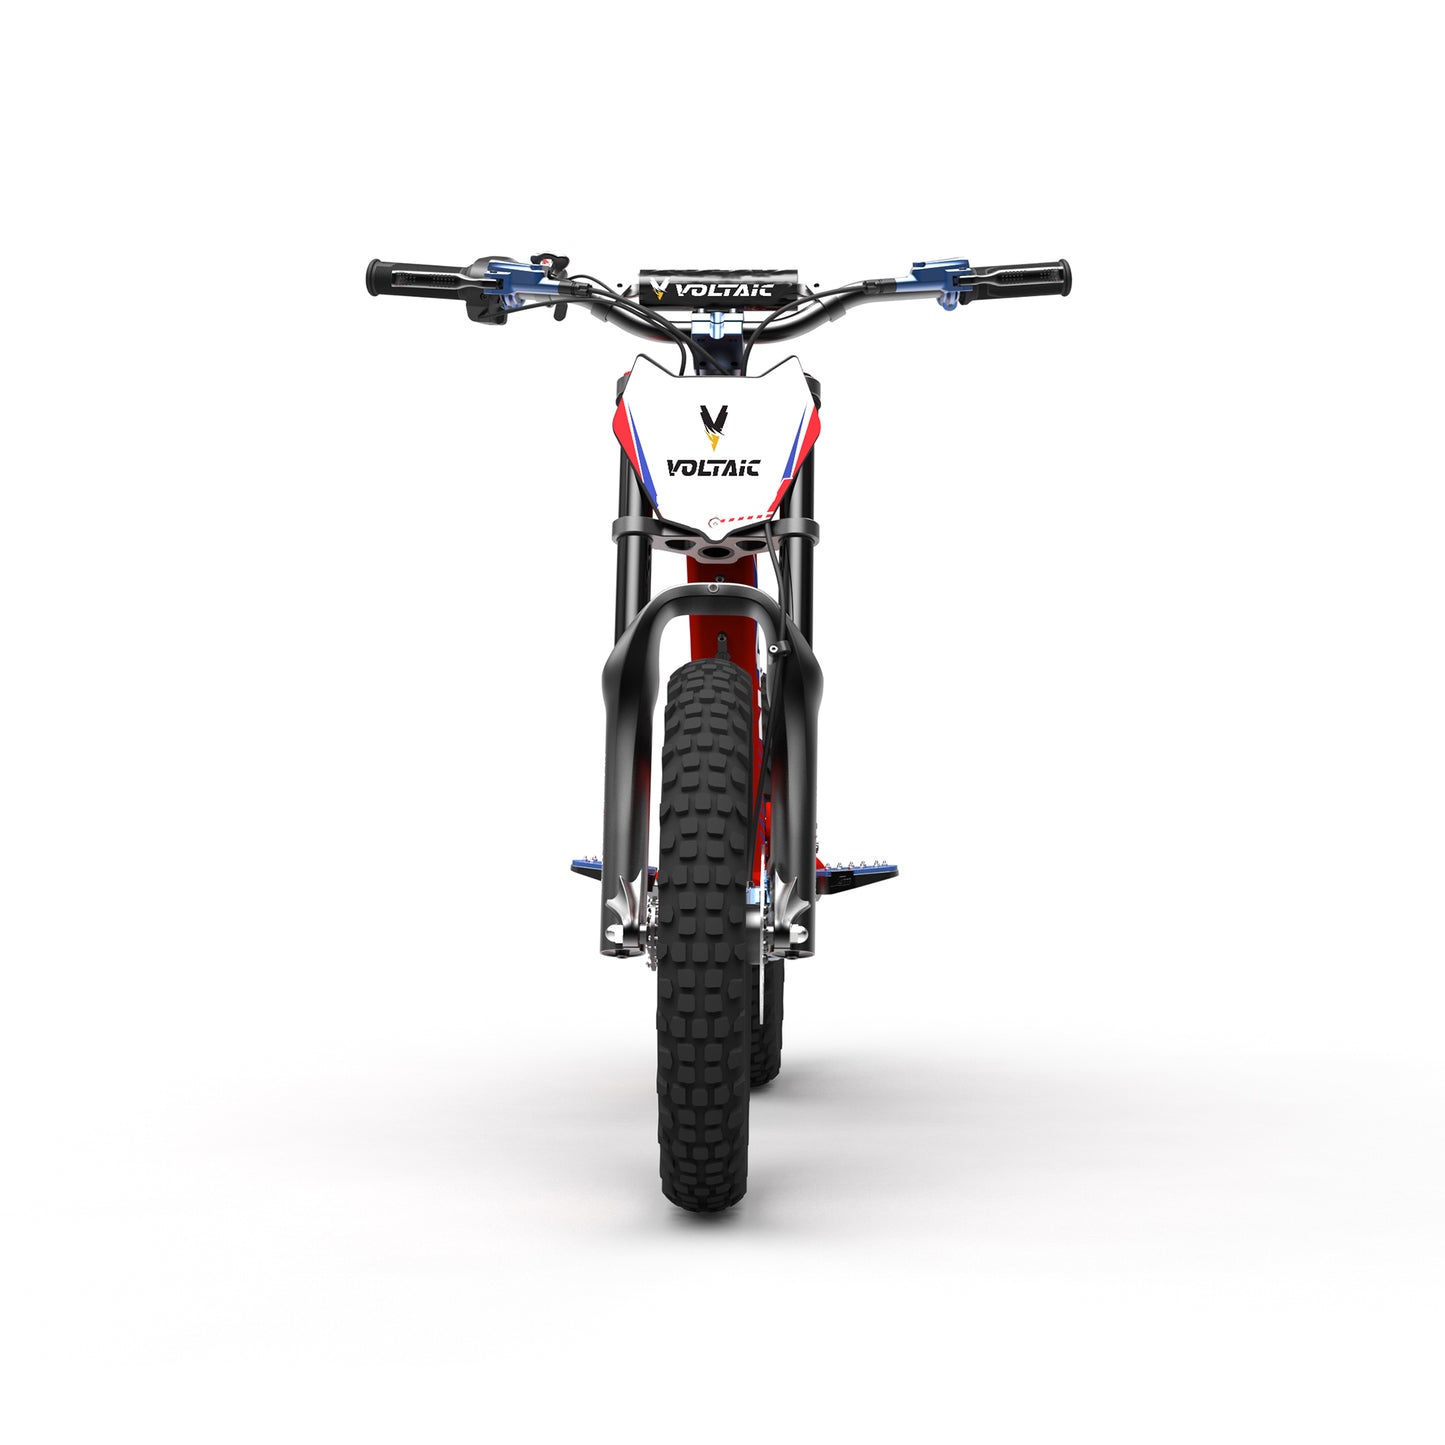 VOLTAIC Flying Fox Youth 750w Electric Dirt Bike w/60 minutes Max Range & 19mp/h Max Speed - Red